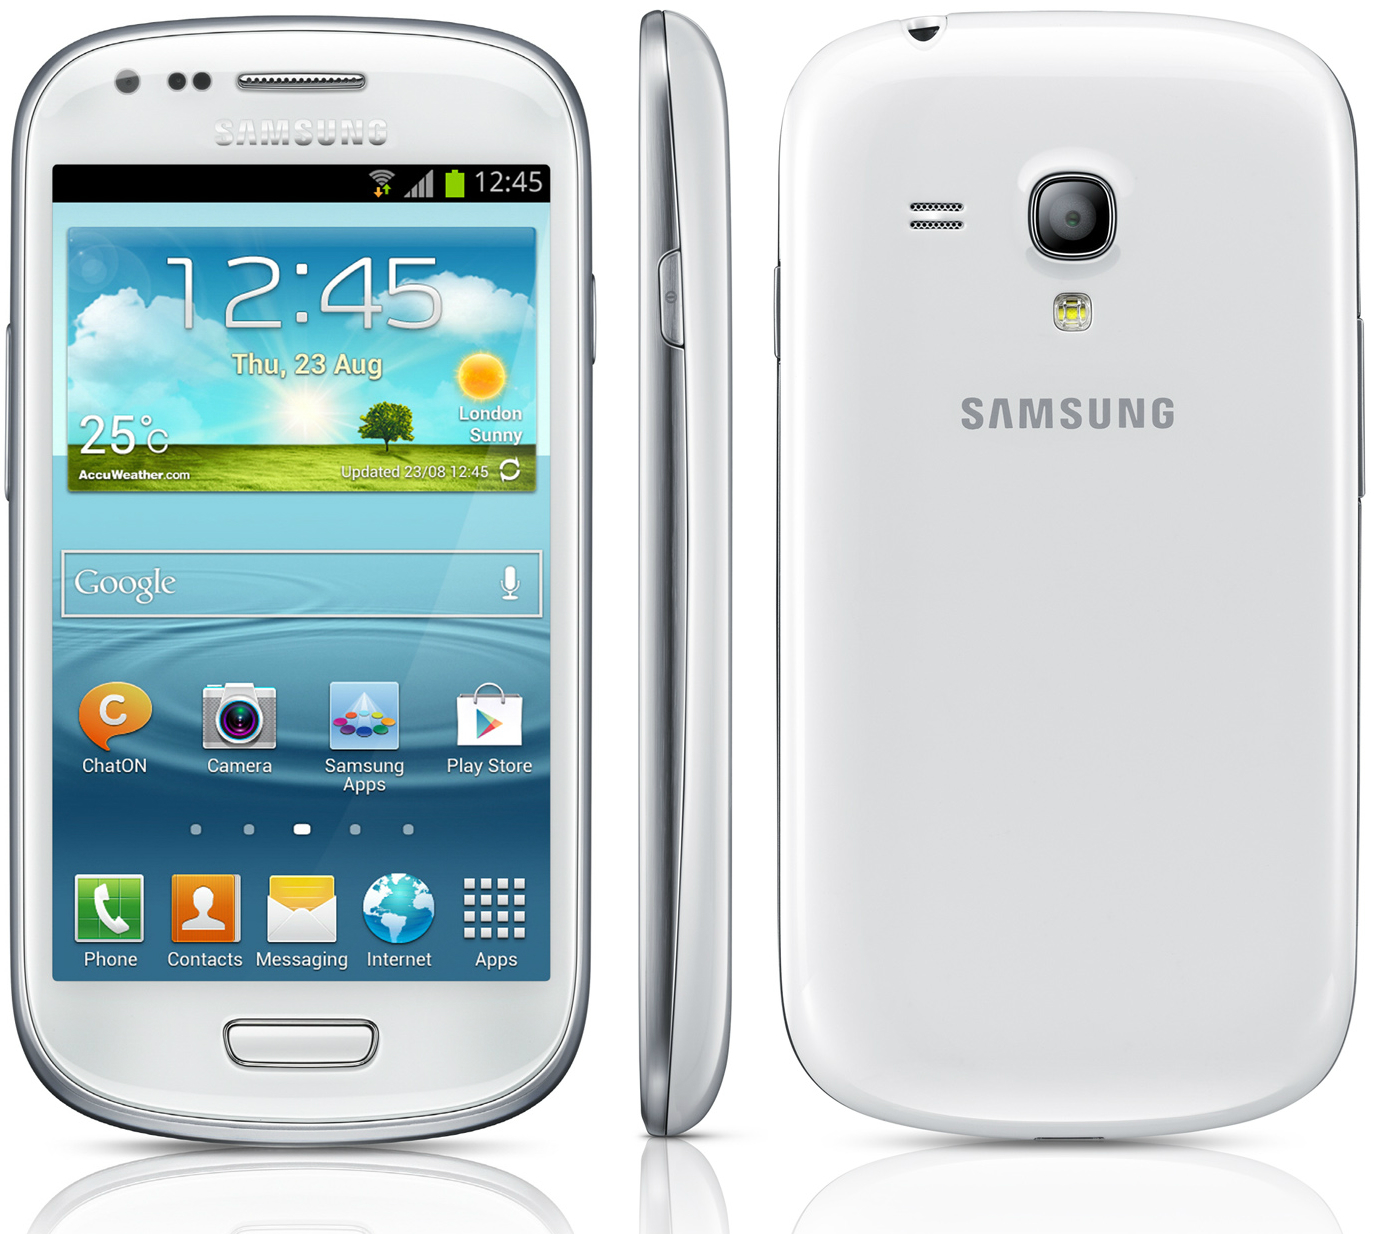 Samsung Galaxy S3 Pictures